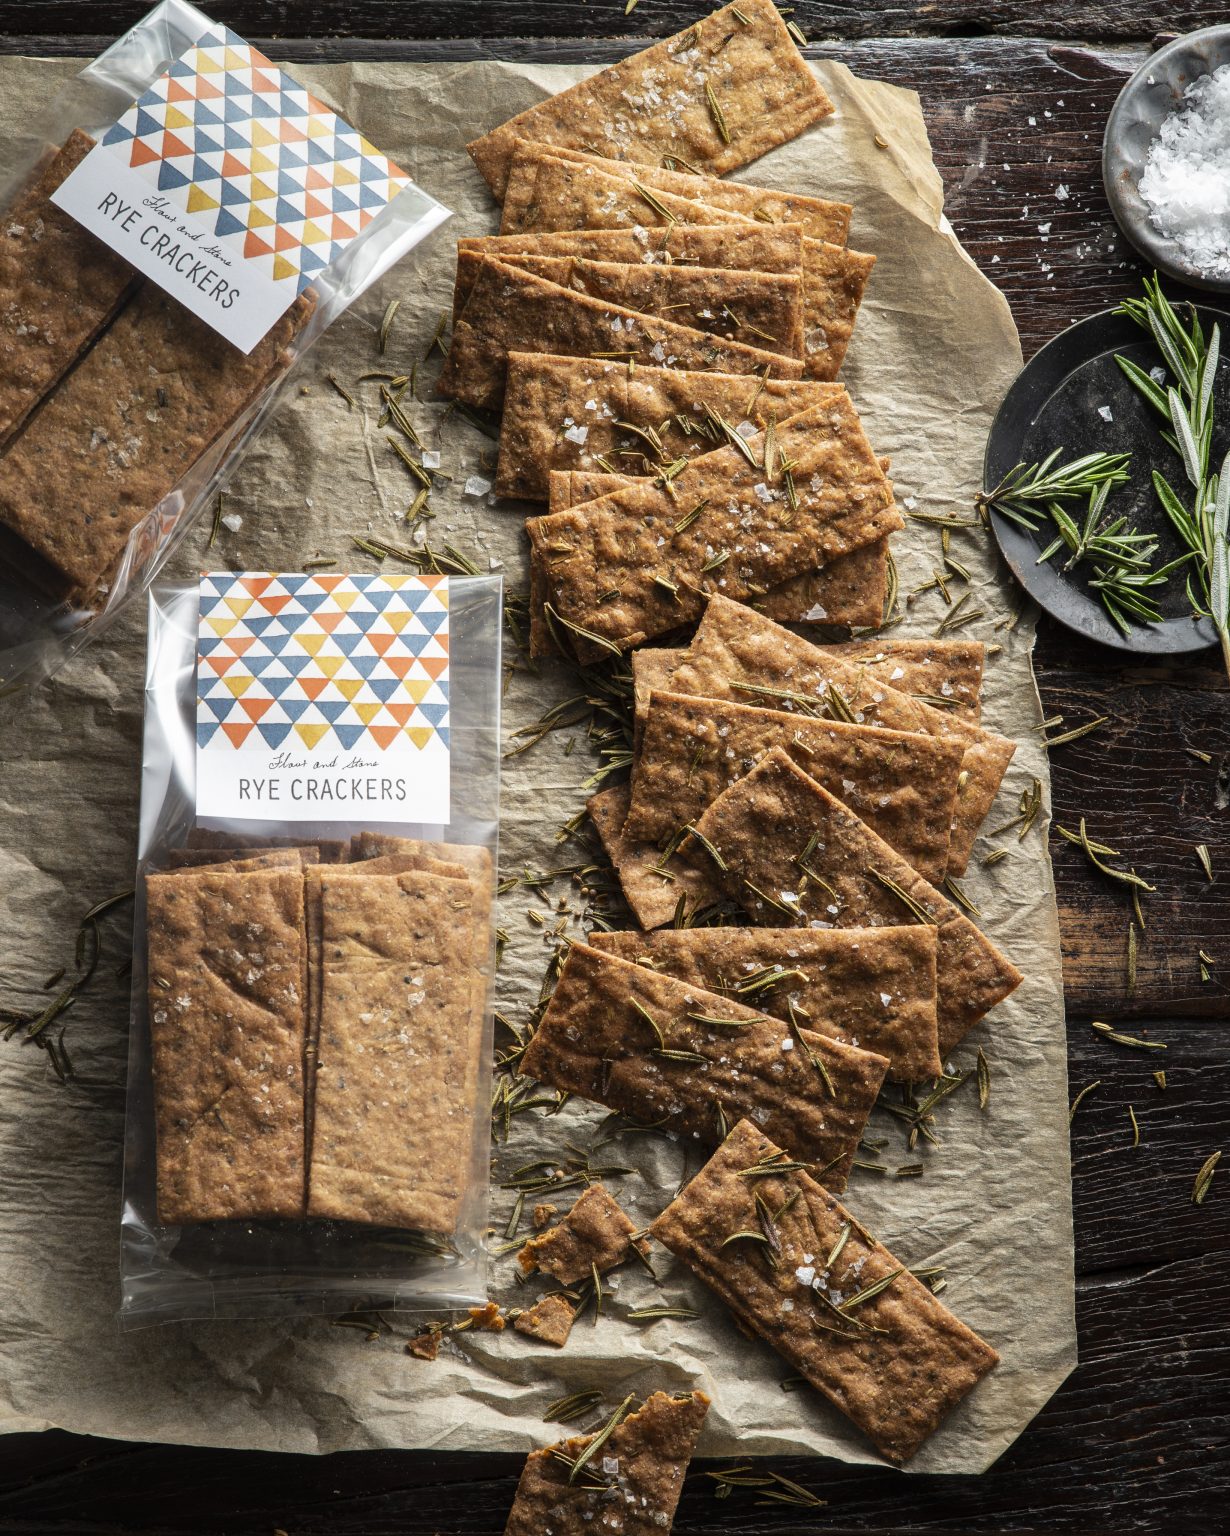 Rye crackers: Crunchy snacks made from hearty rye flour, perfect for pairing with cheeses and dips